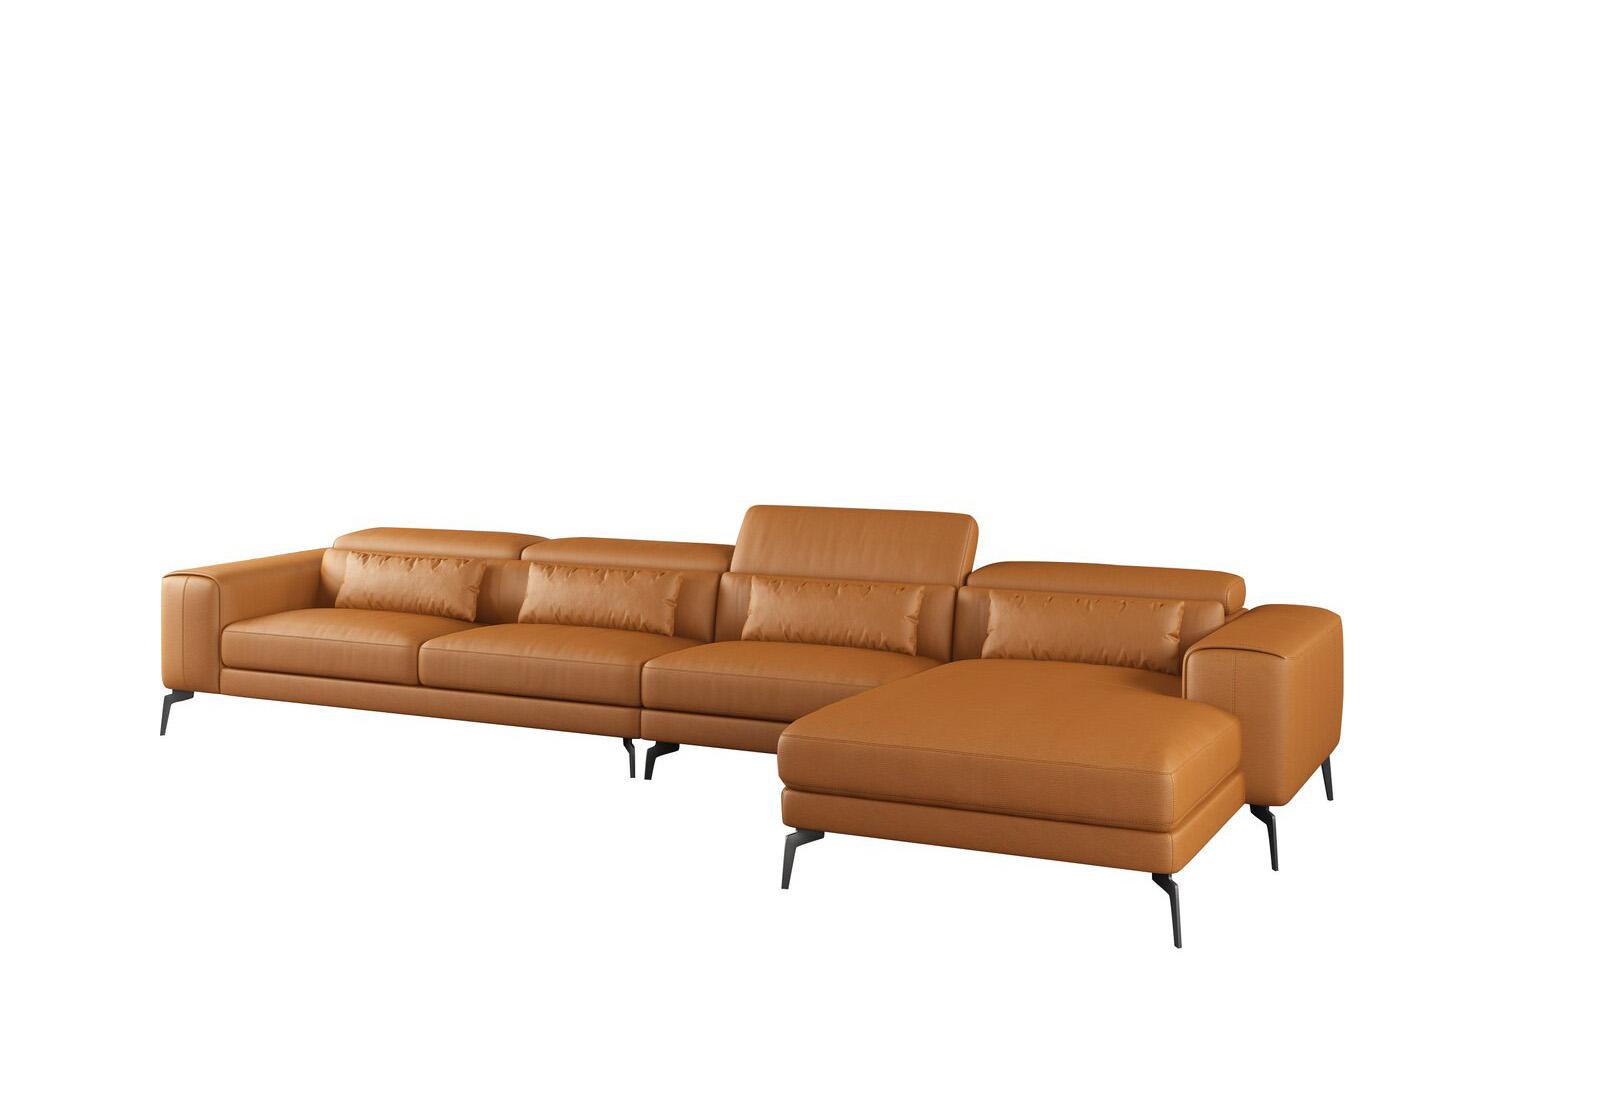 Contemporary, Modern 5 Seater Sectional Sofa CAVOUR EF-12556R-4RHF in Cognac Leather